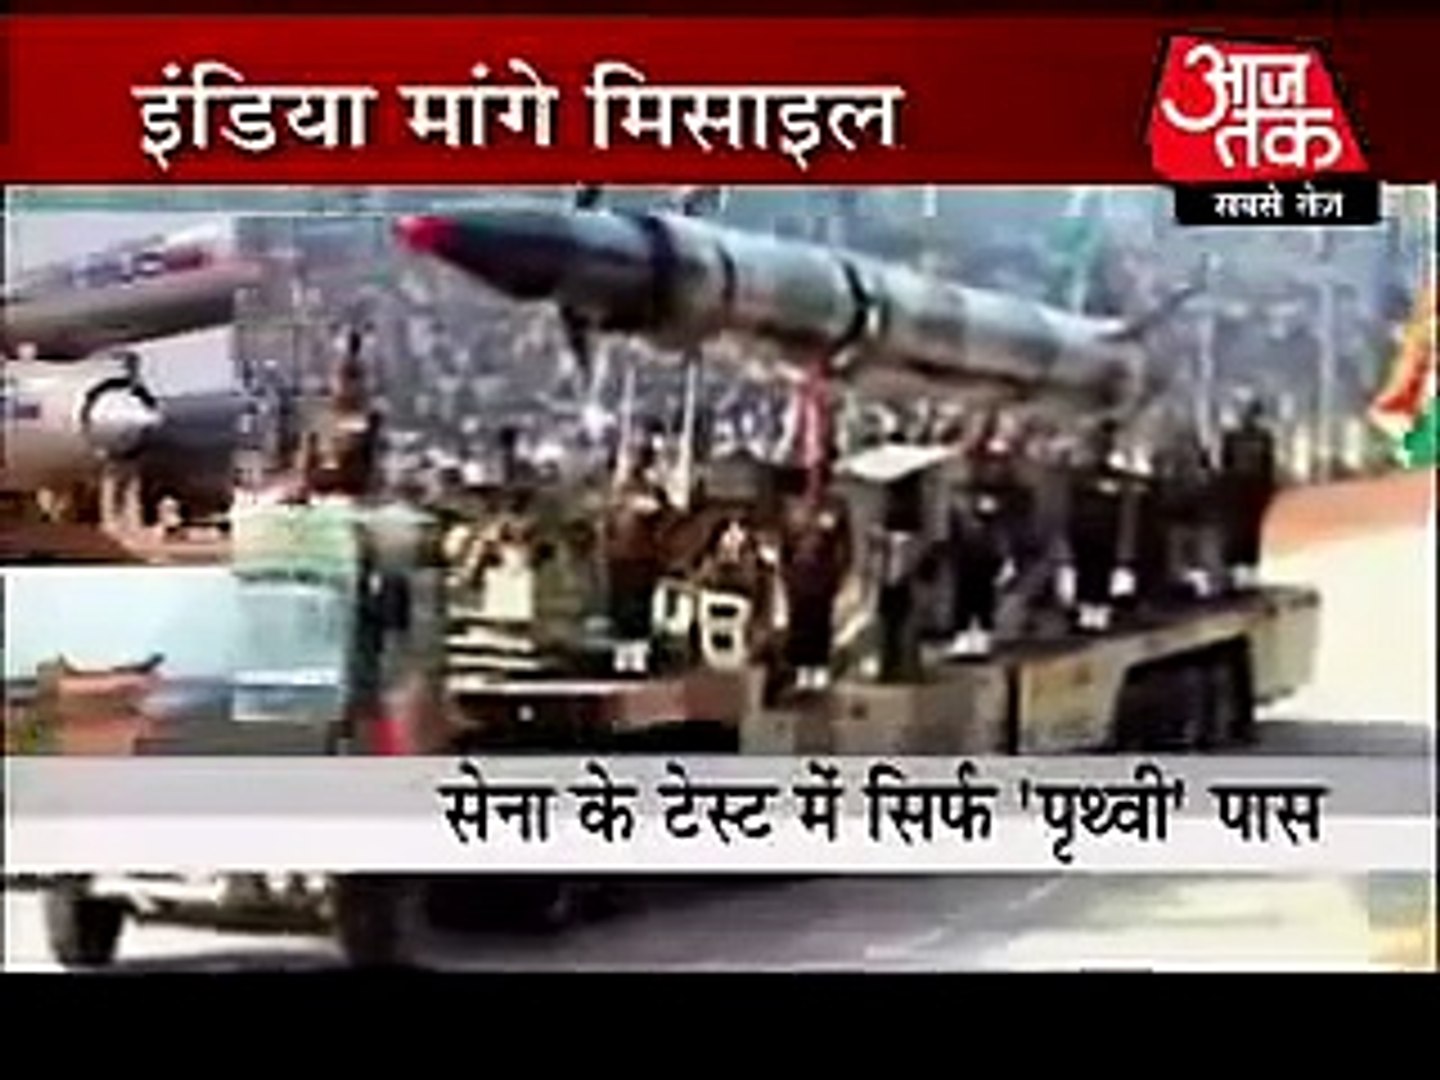 Indian News Channel Report-- Pakistan is power full then India -India News Channel Proved